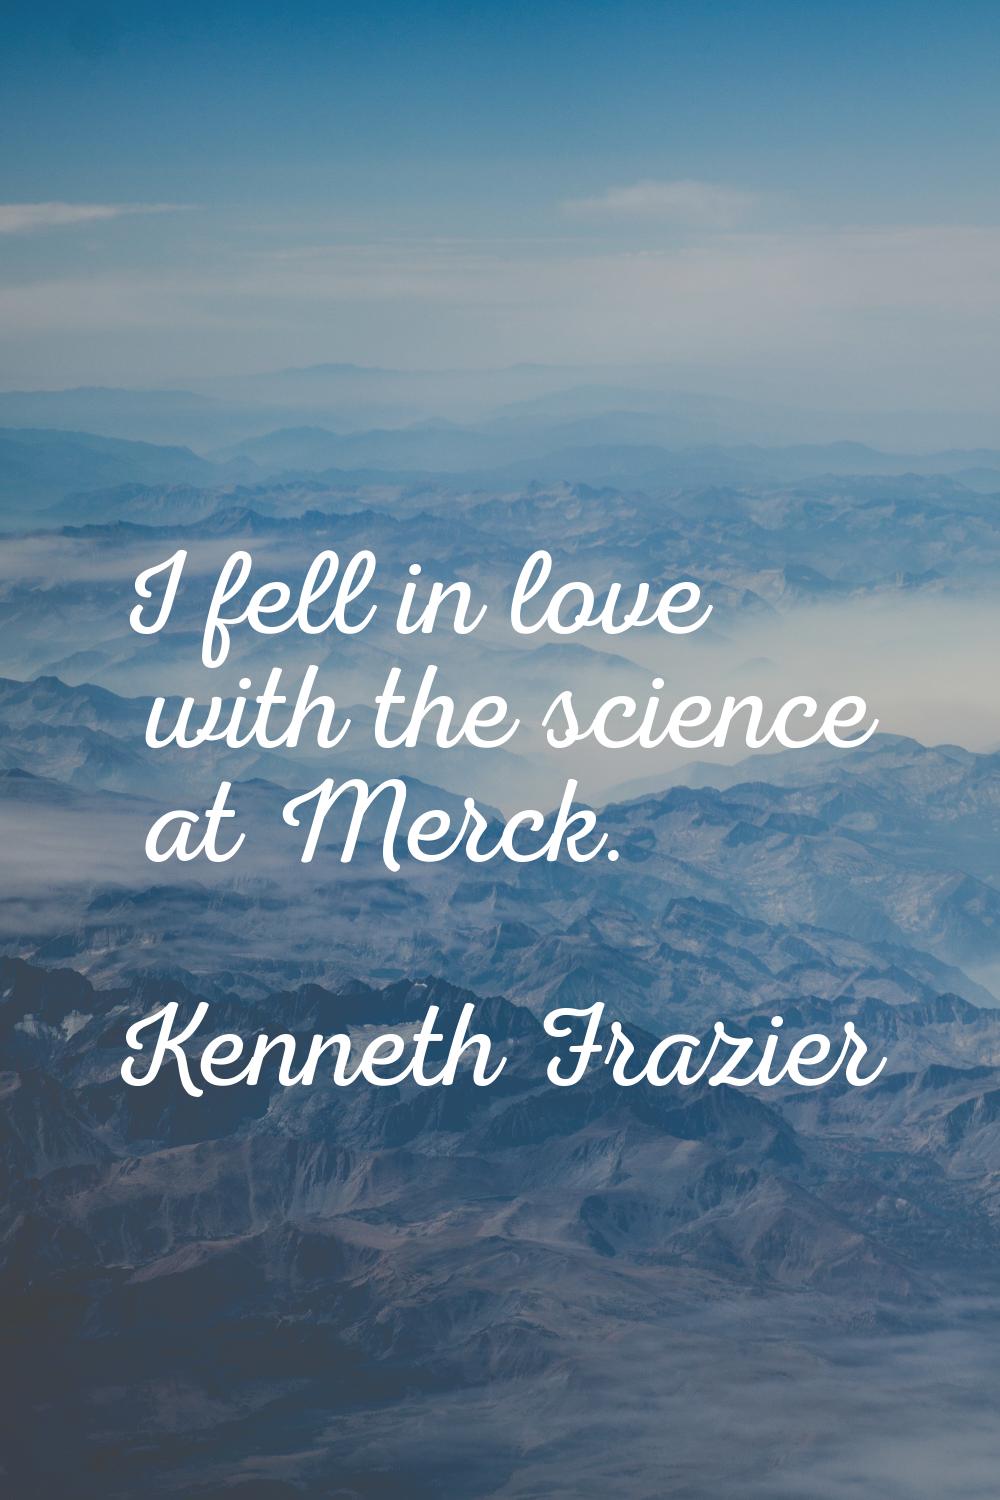 I fell in love with the science at Merck.